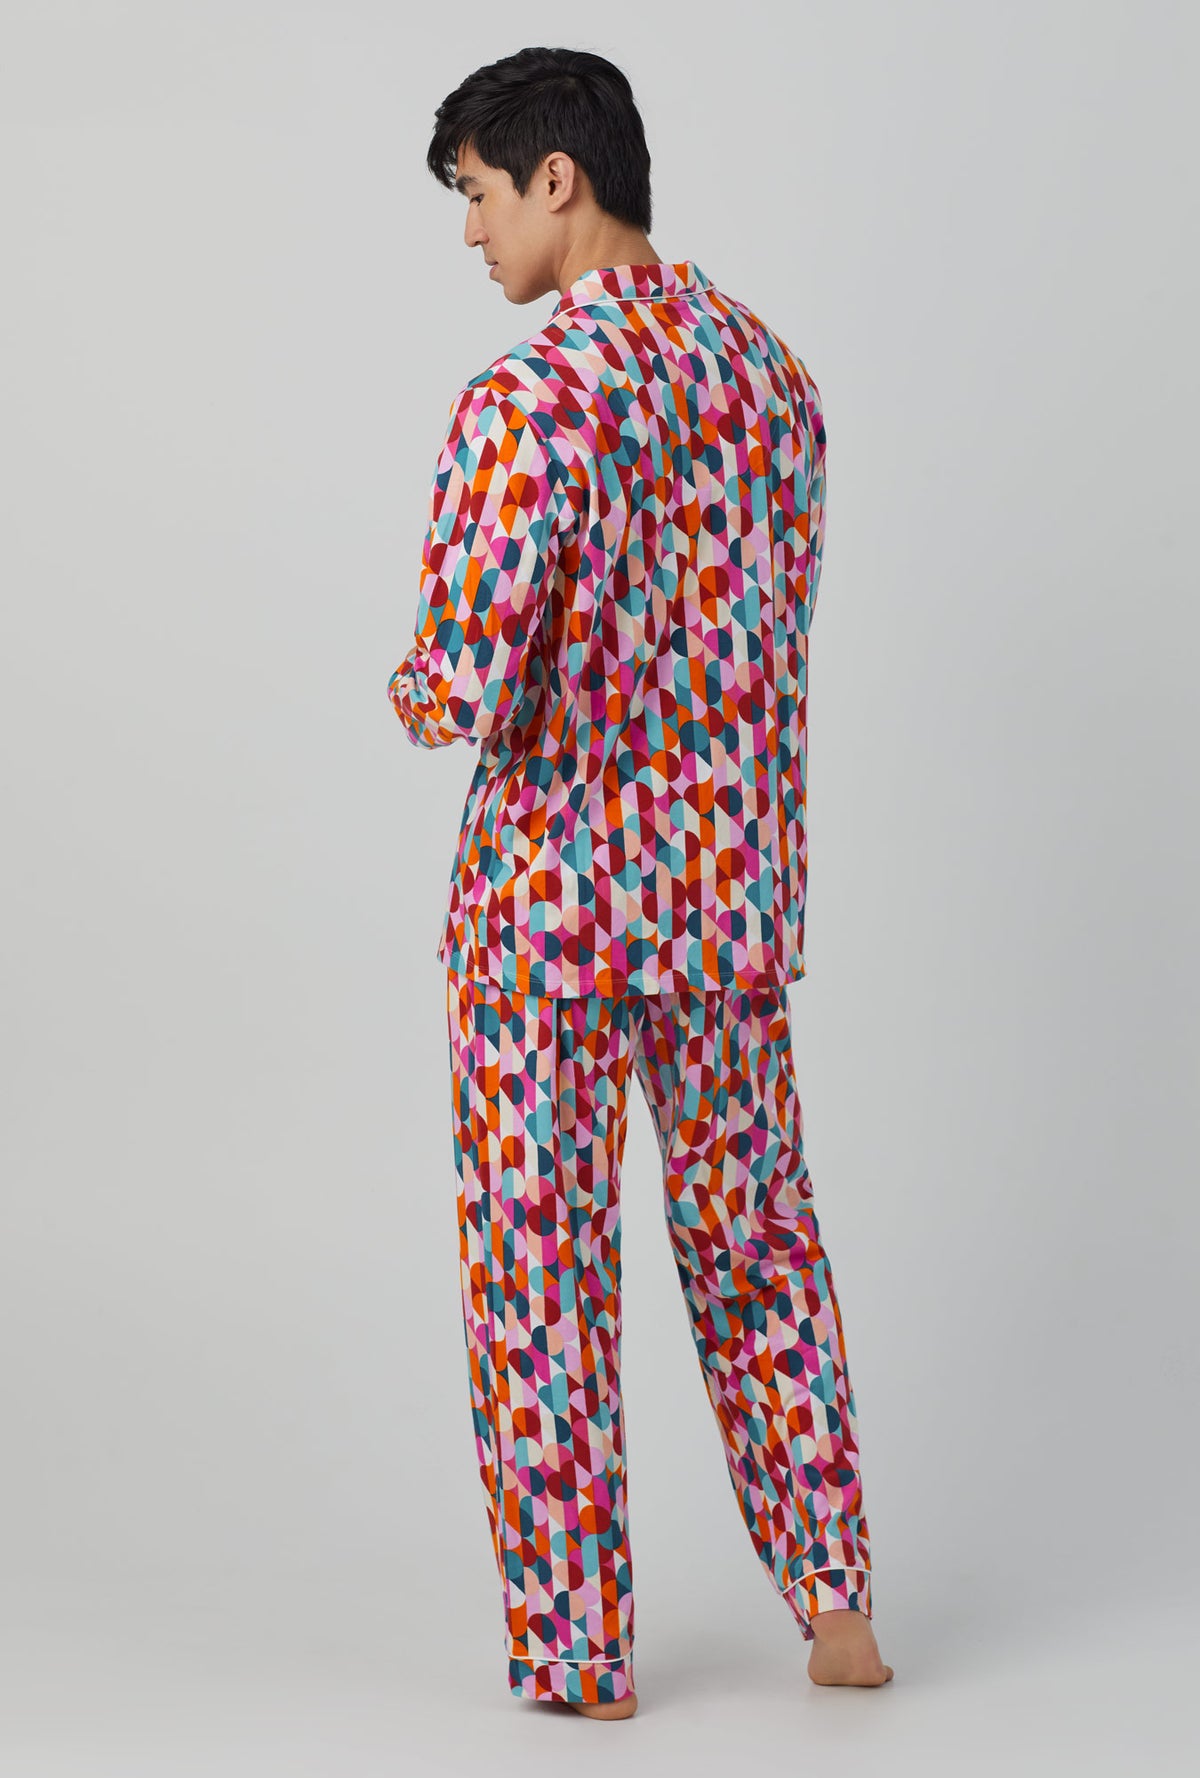 A man wearing Long Sleeve Classic Stretch Jersey PJ Set with dancing dots print